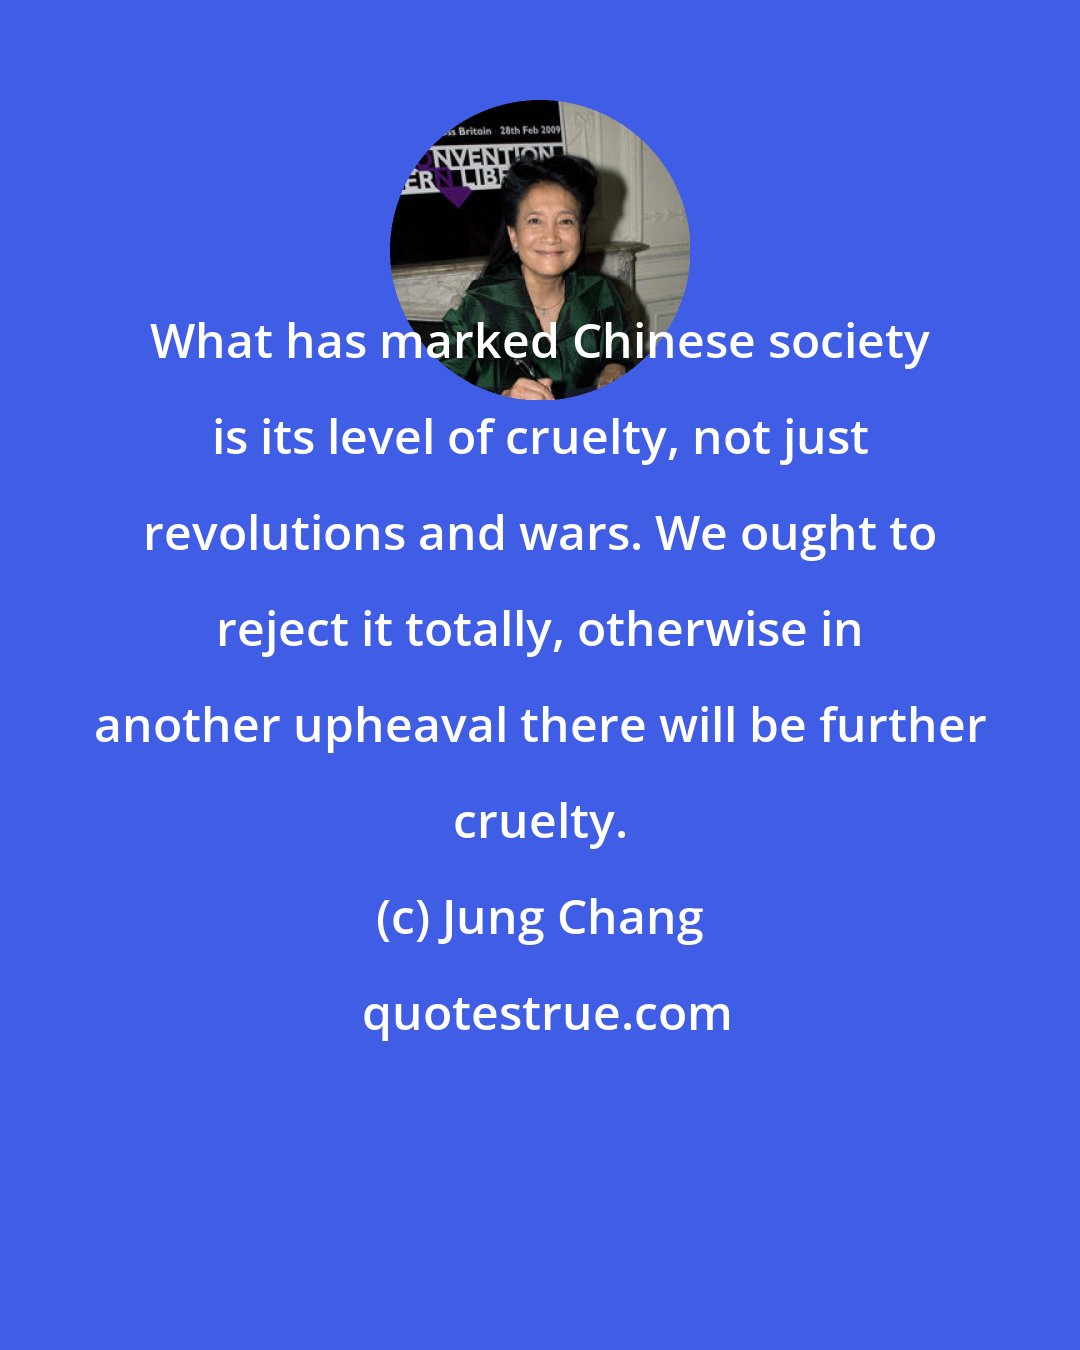 Jung Chang: What has marked Chinese society is its level of cruelty, not just revolutions and wars. We ought to reject it totally, otherwise in another upheaval there will be further cruelty.